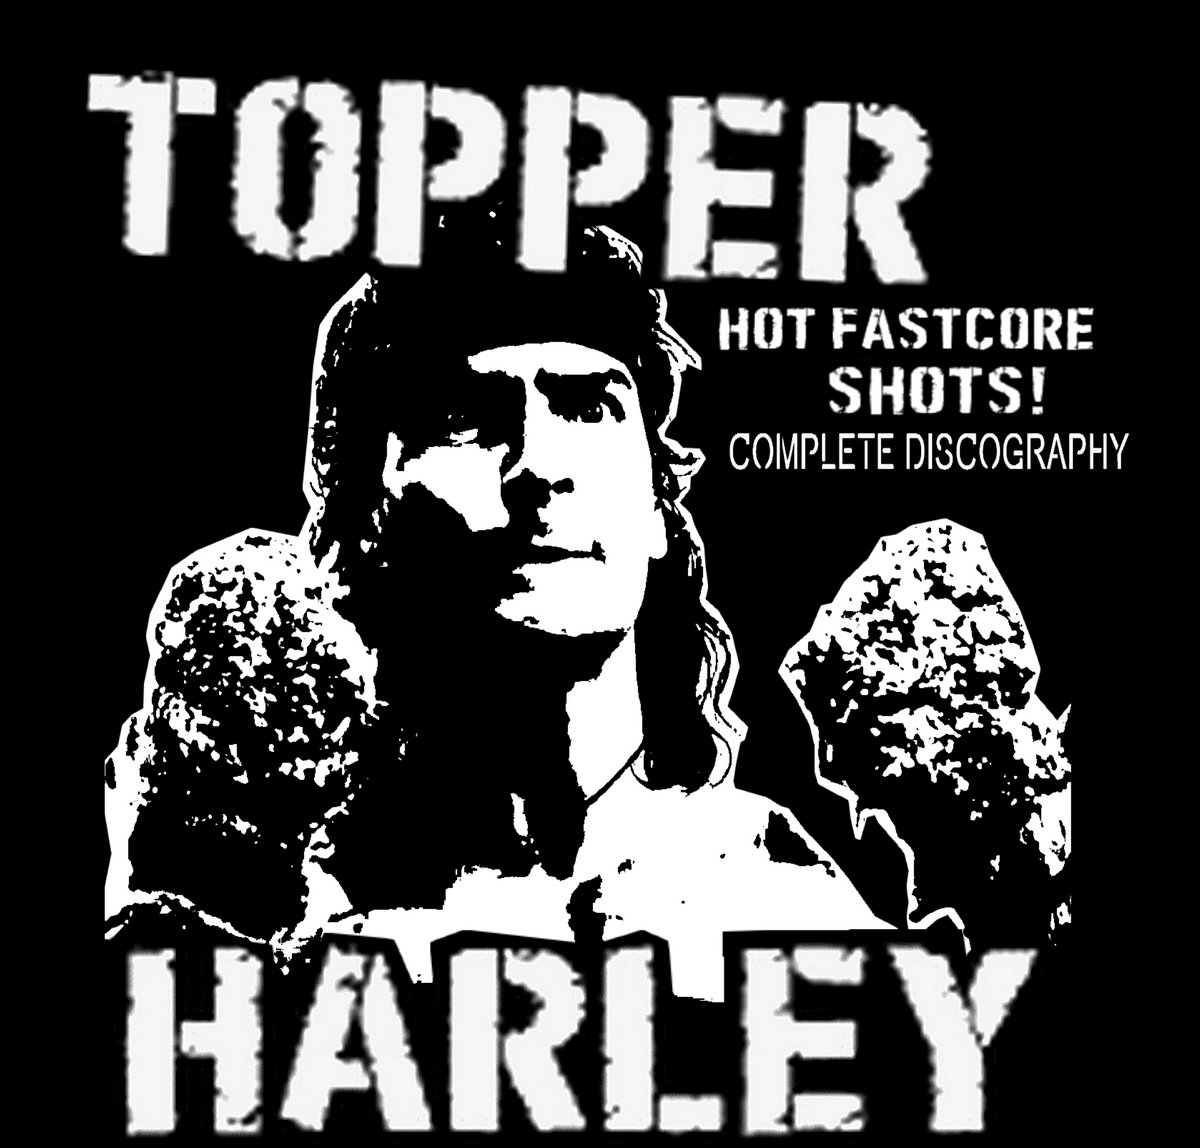 Fastcore. Topper Harley. Топпер Харли. Топпер Харли горячие головы. Complete discography.